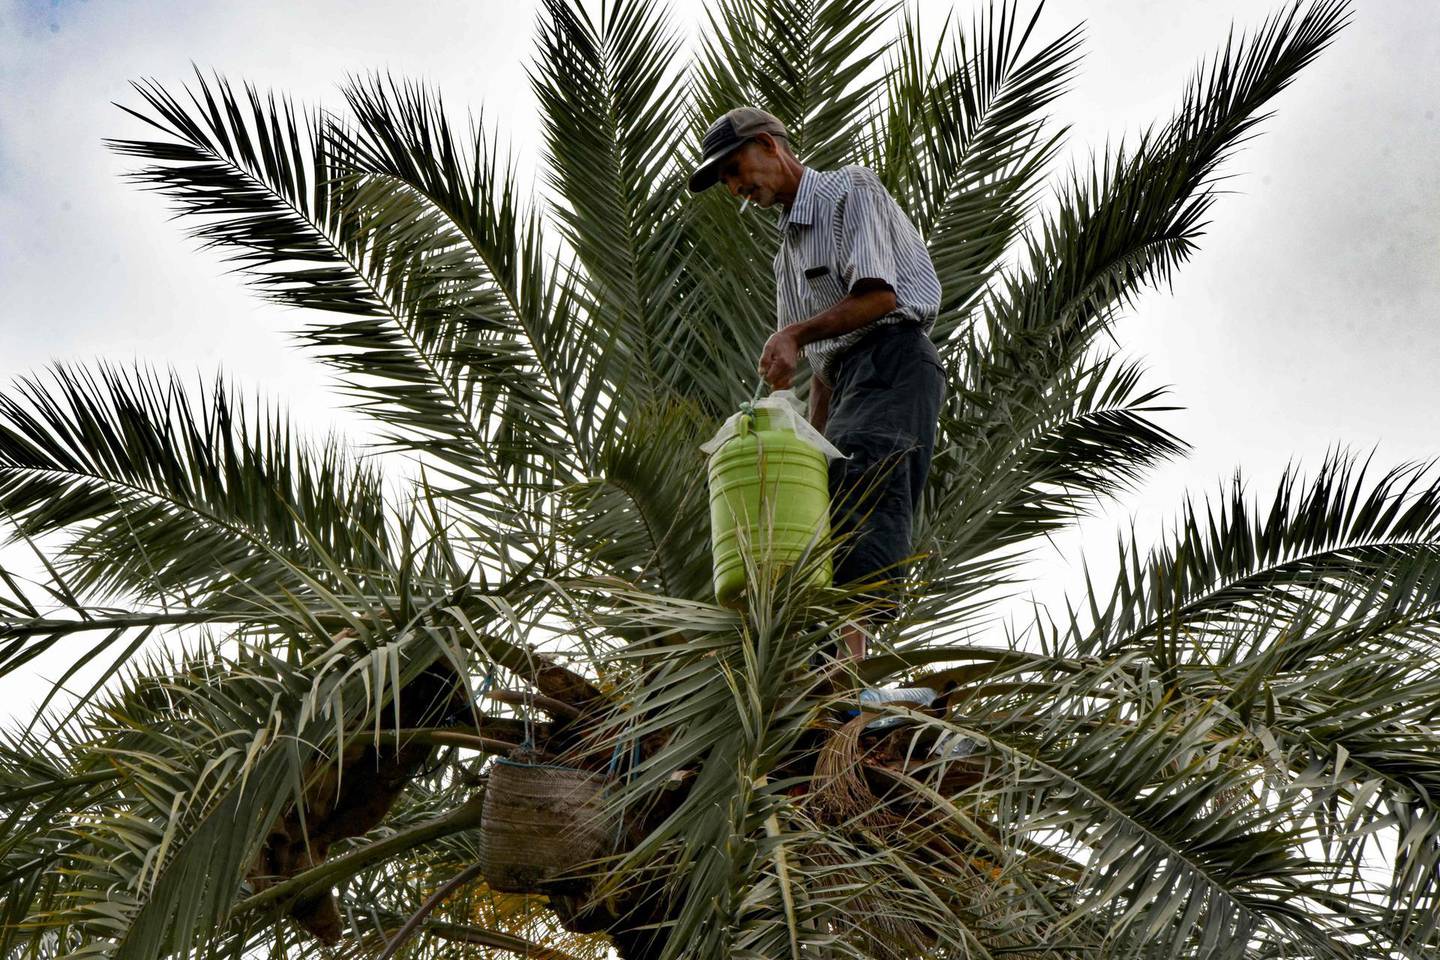 A man picks fruits from a palm tree, to be used for making legmi, a coveted date palm drink, in the southwestern Tunisian town of Gabes on July 18, 2019.  In southern Tunisia residents rush from sunrise to buy legmi, a coveted date palm drink too delicate to be sold far from the oasis.
Favoured particularly during the Muslim holy month of Ramadan for its high sugar content, this drink typical of Saharan oases is primarily consumed from March to October. / AFP / Mourad MJAIED
